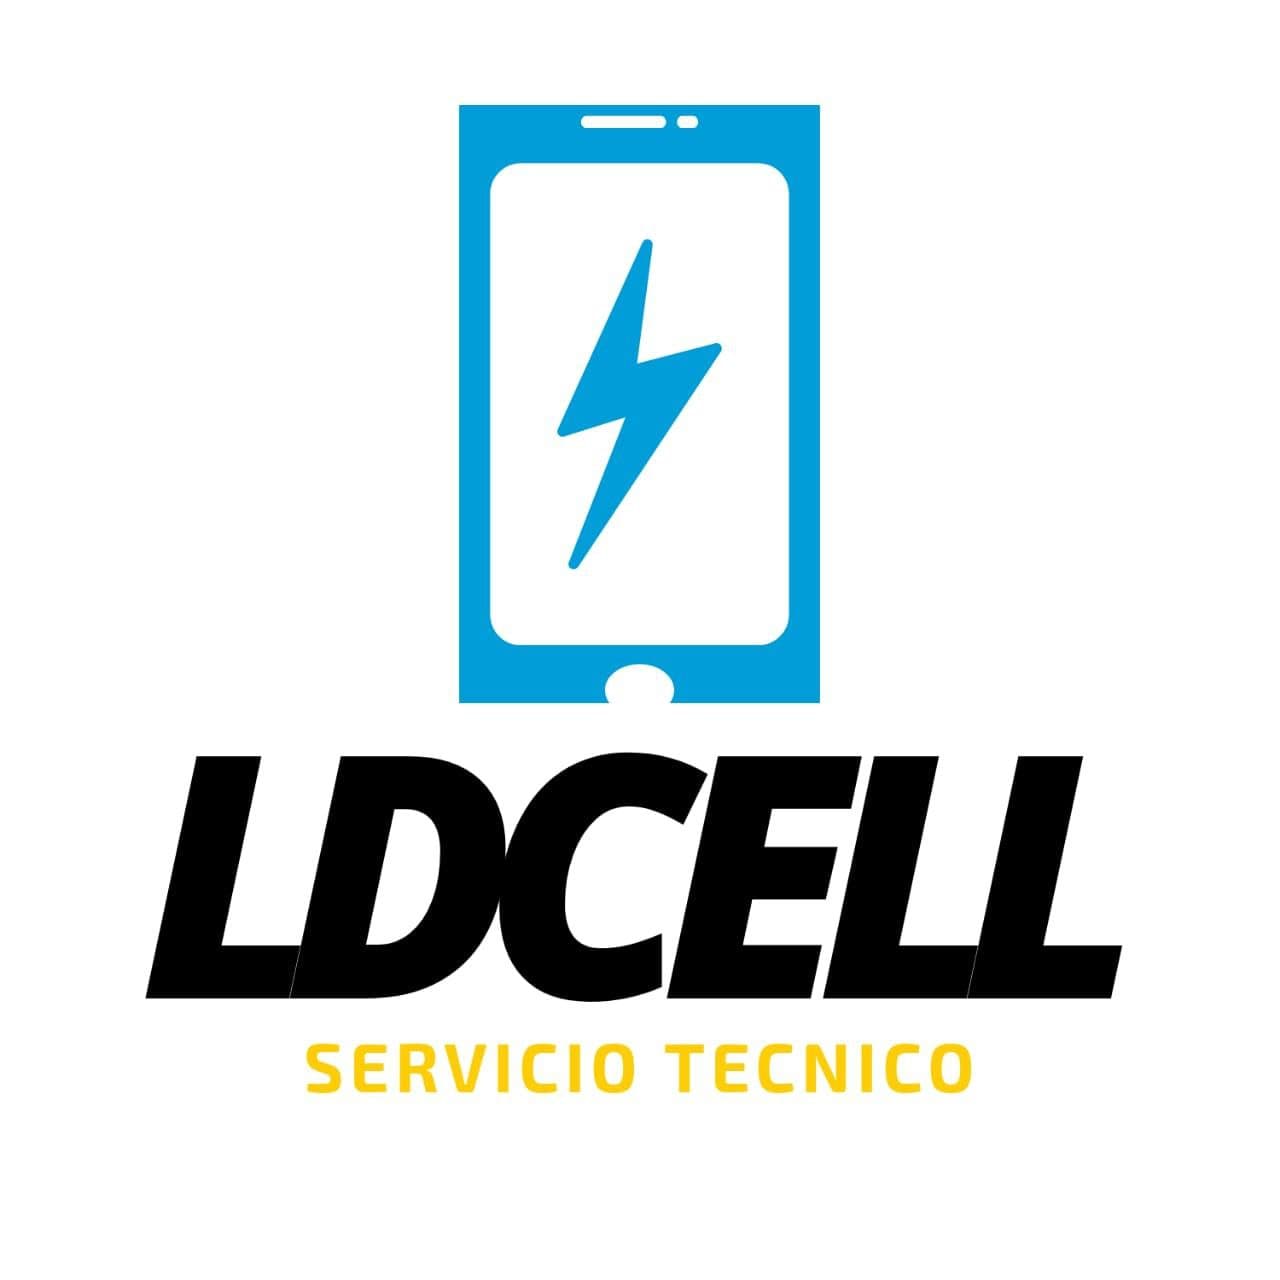 LDCELL